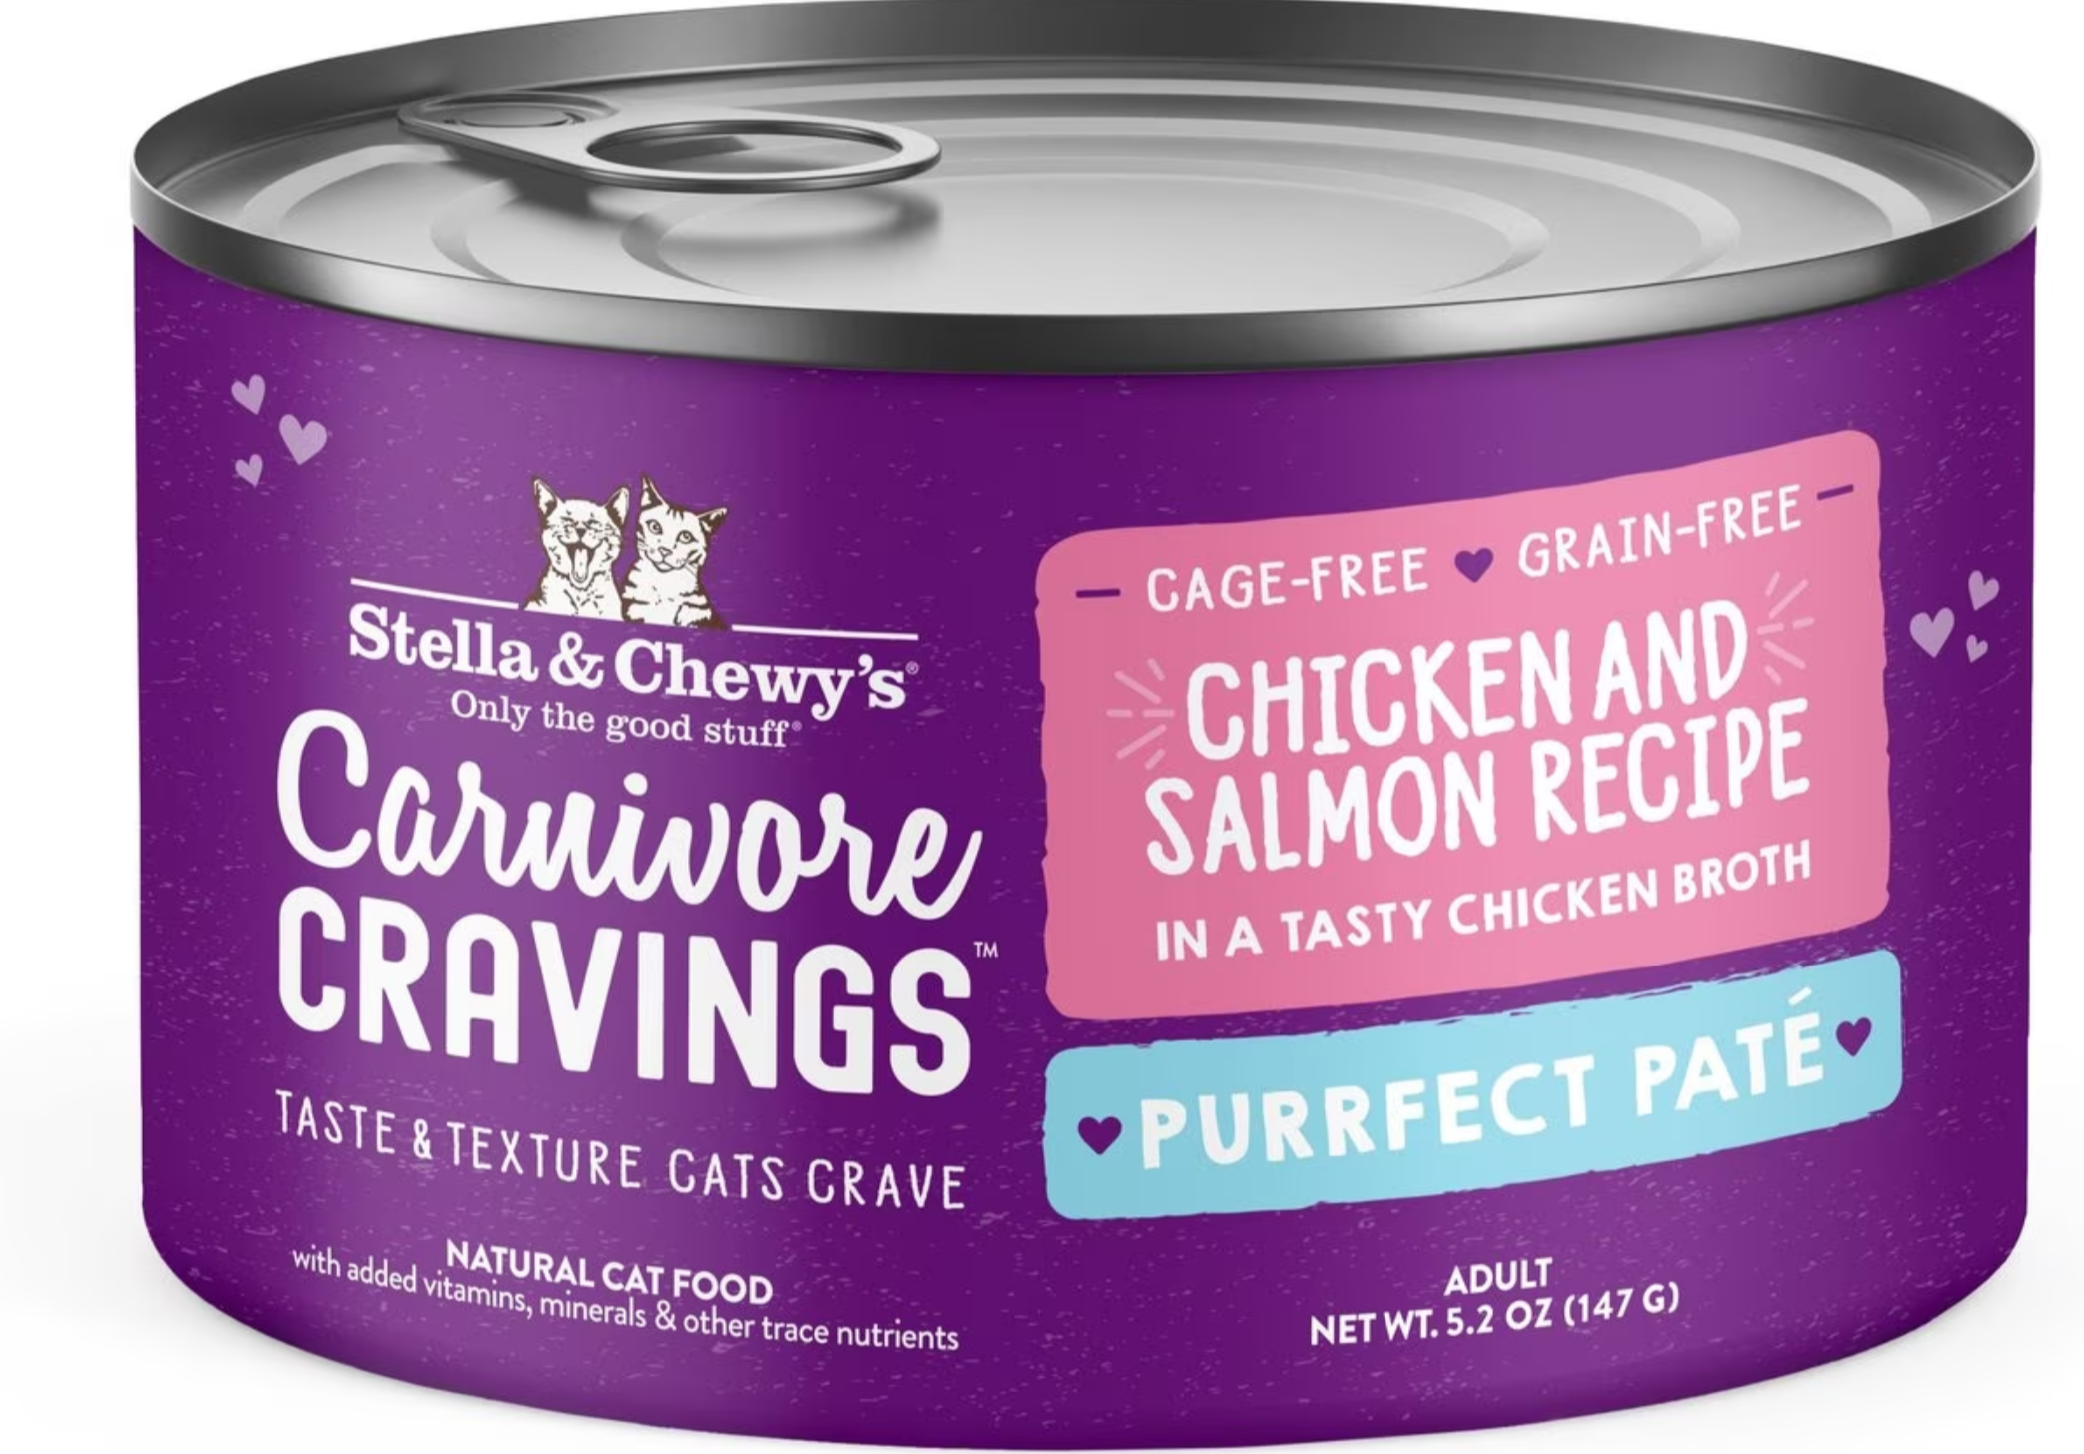 Stella & Chewy's Carnivore Cravings Purrfect Pate Chicken & Salmon Recipe - 5.2oz Can